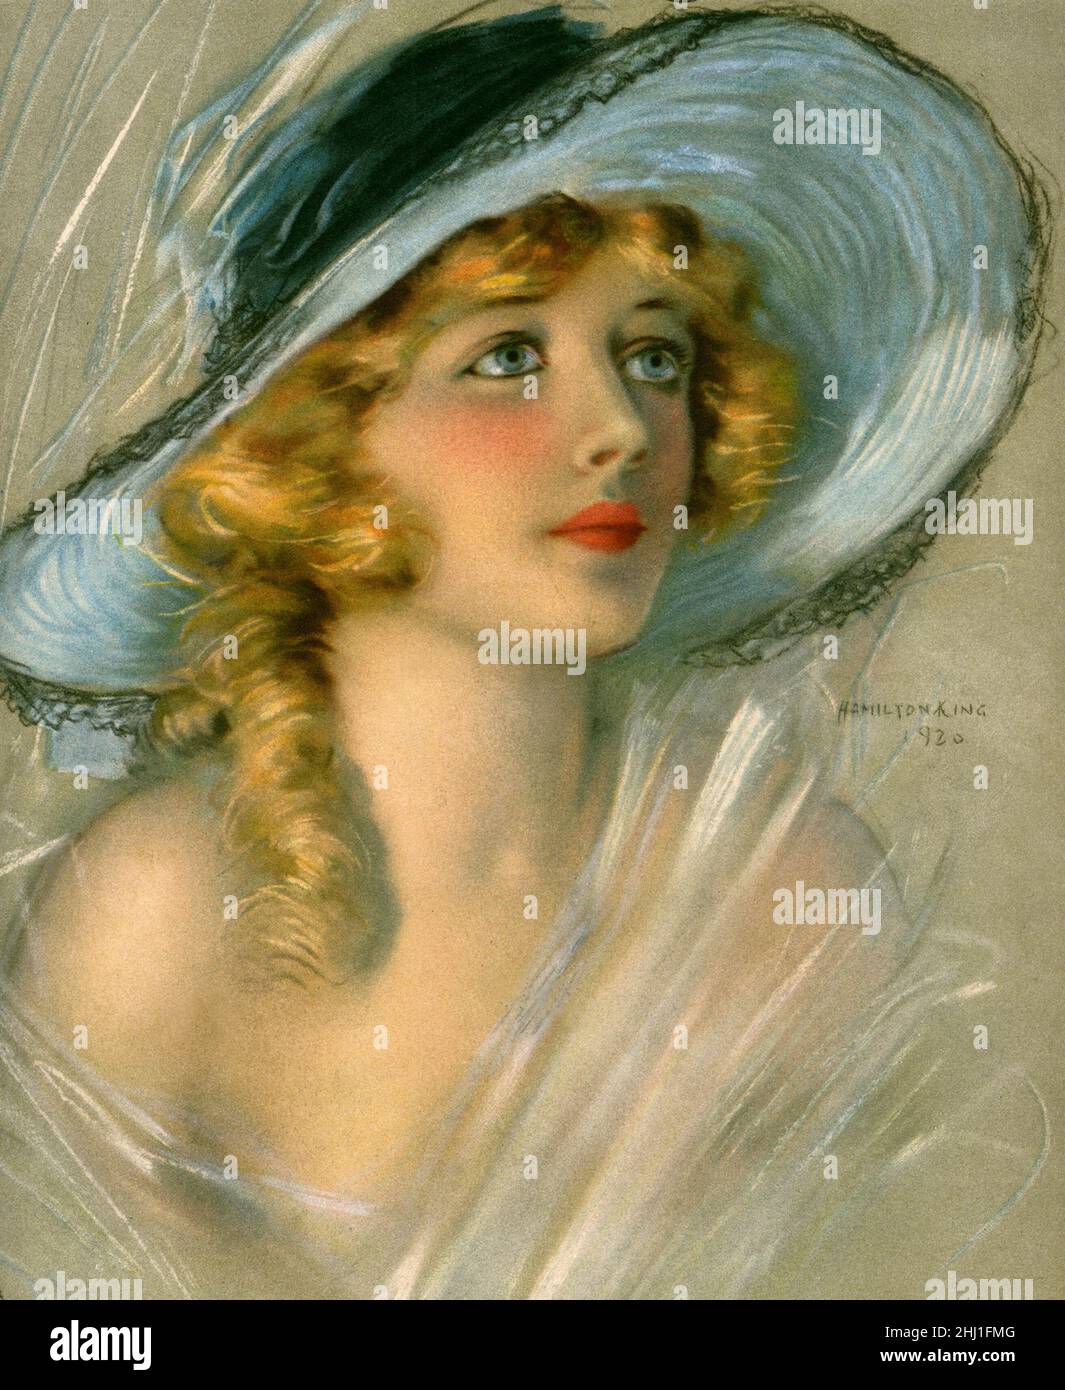 Hamilton King (American Portrait Artist) - Portrait of Marion Davies (American Actress) - for the June 1920 cover of Theatre Magazine Stock Photo